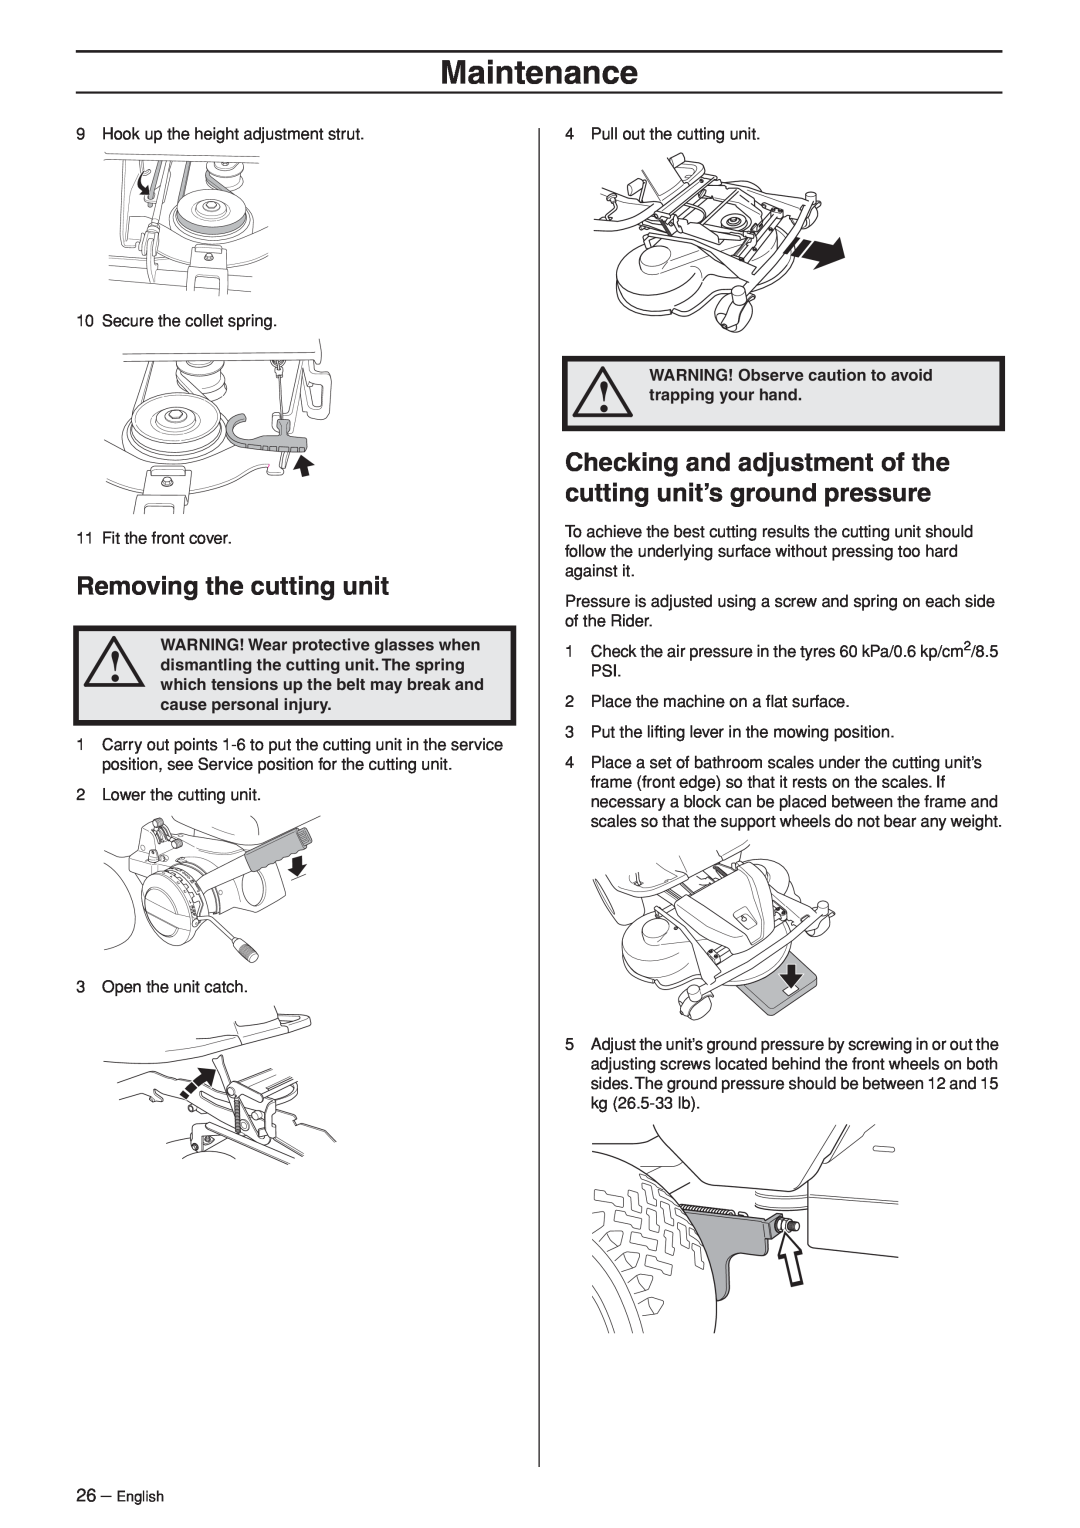 Husqvarna 15Ts AWD manual Removing the cutting unit, Maintenance, WARNING! Wear protective glasses when, trapping your hand 